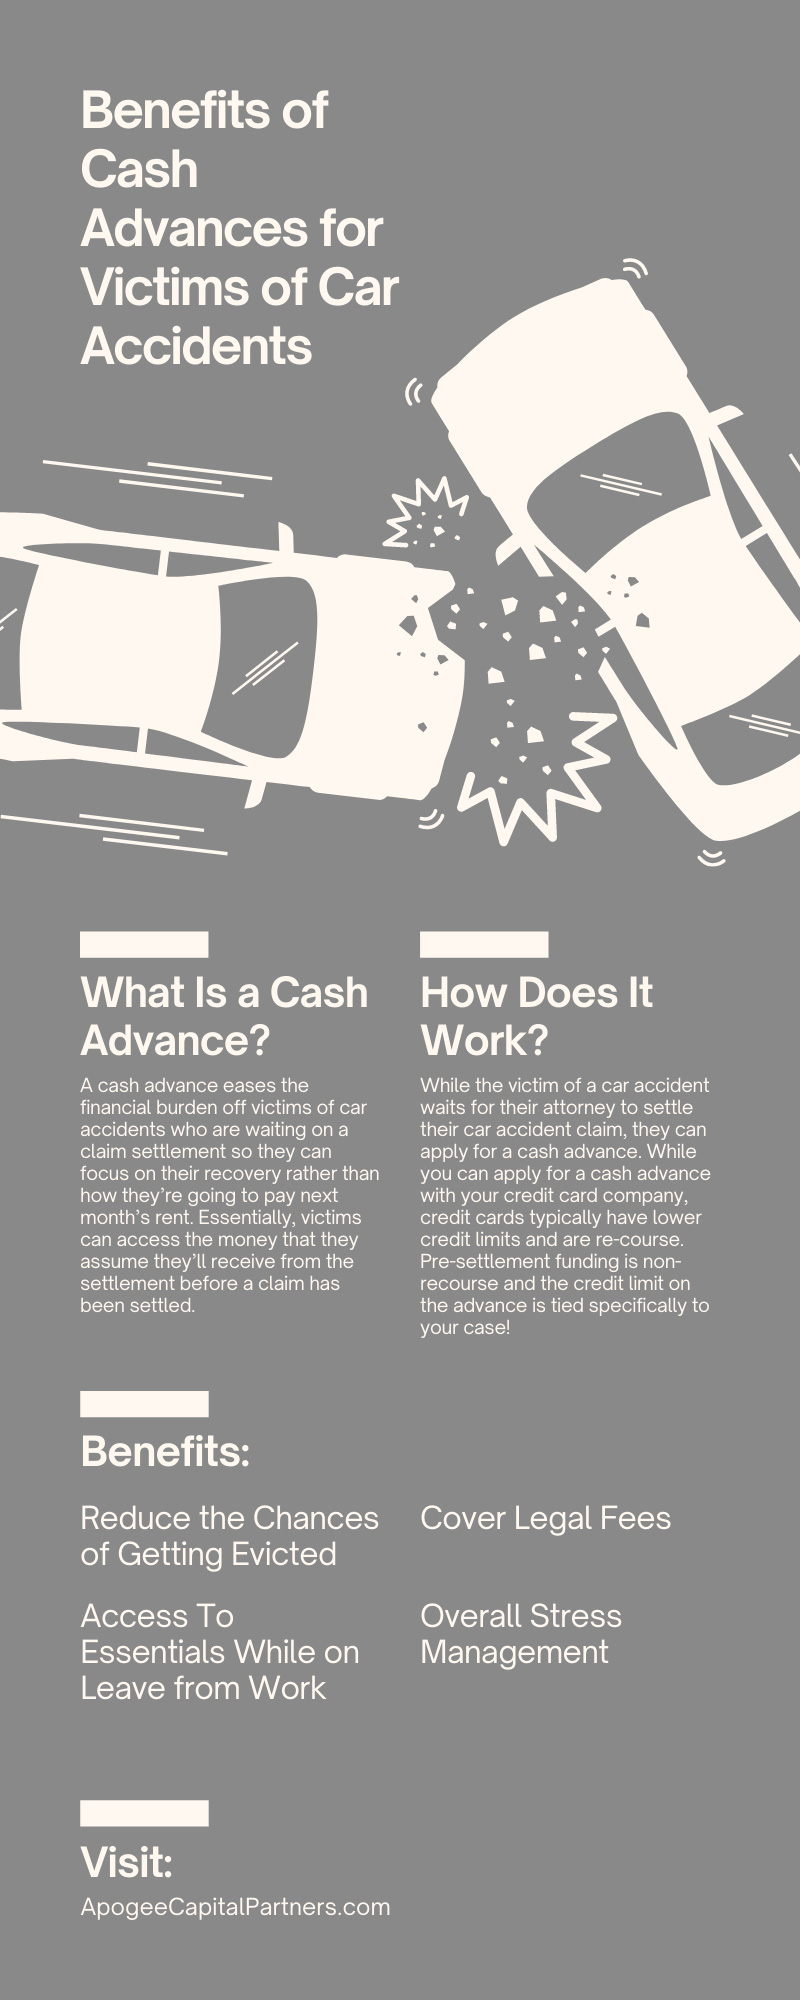 Benefits of Cash Advances for Victims of Car Accidents